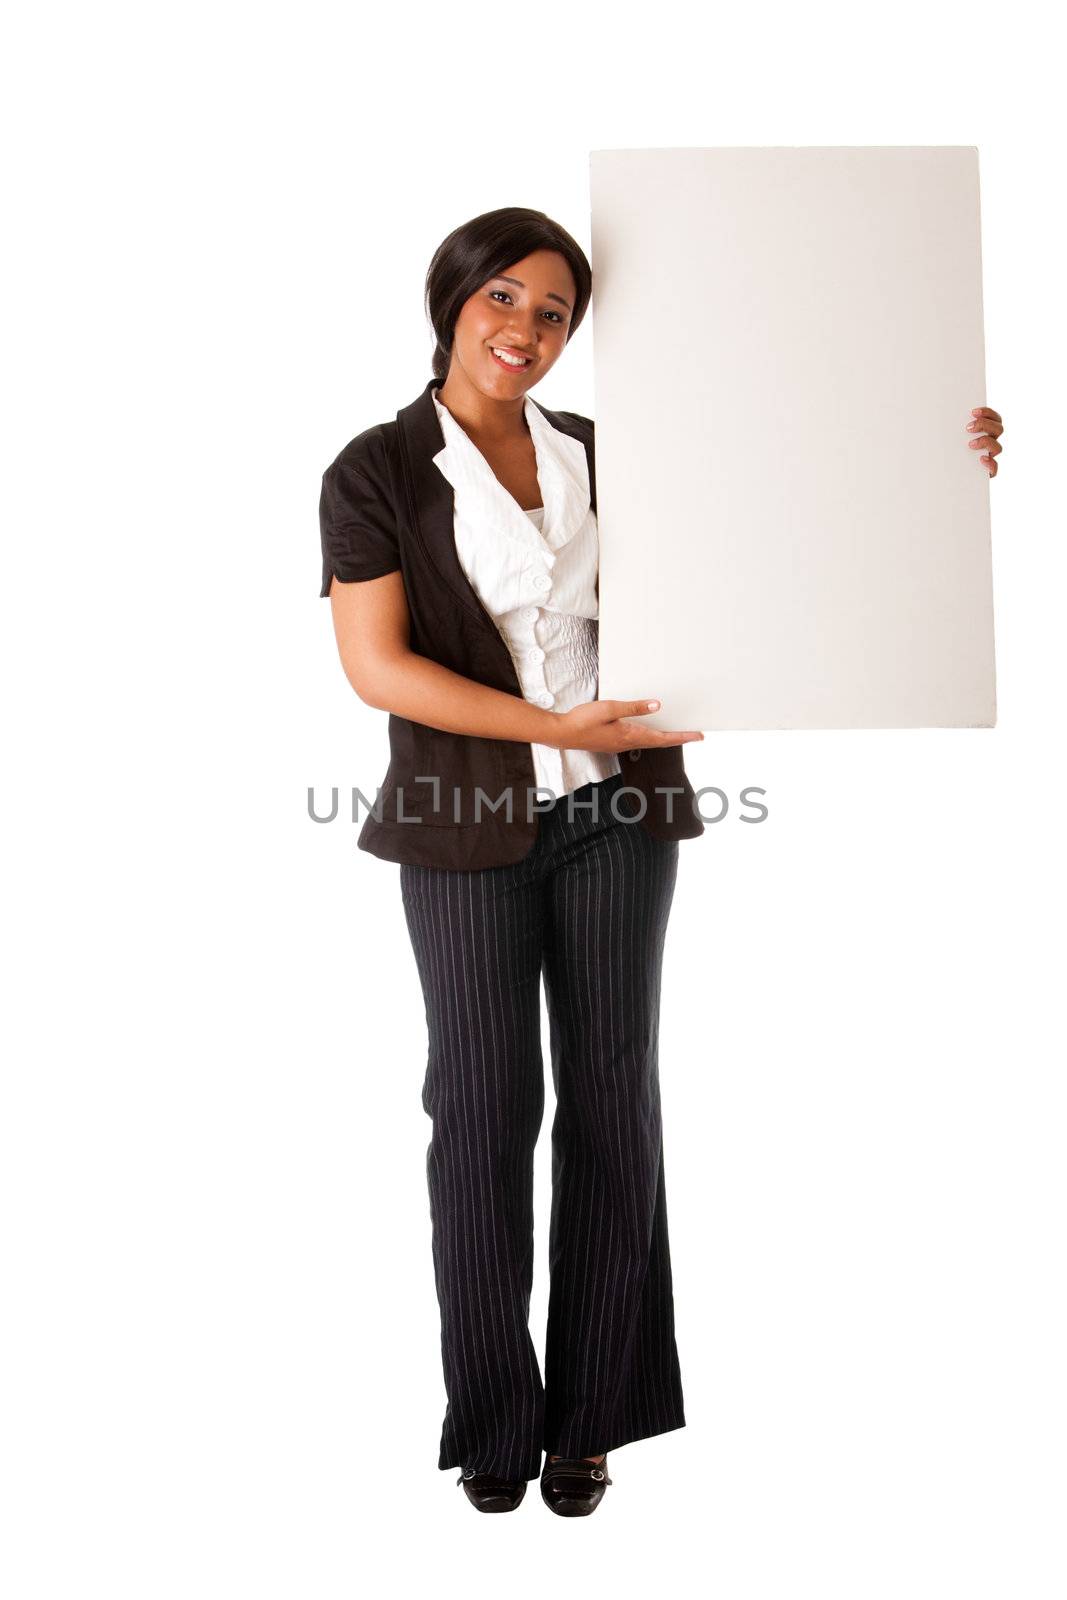 Beautiful smiling successful corporate business woman pitching an idea presenting blank whiteboard, isolated.